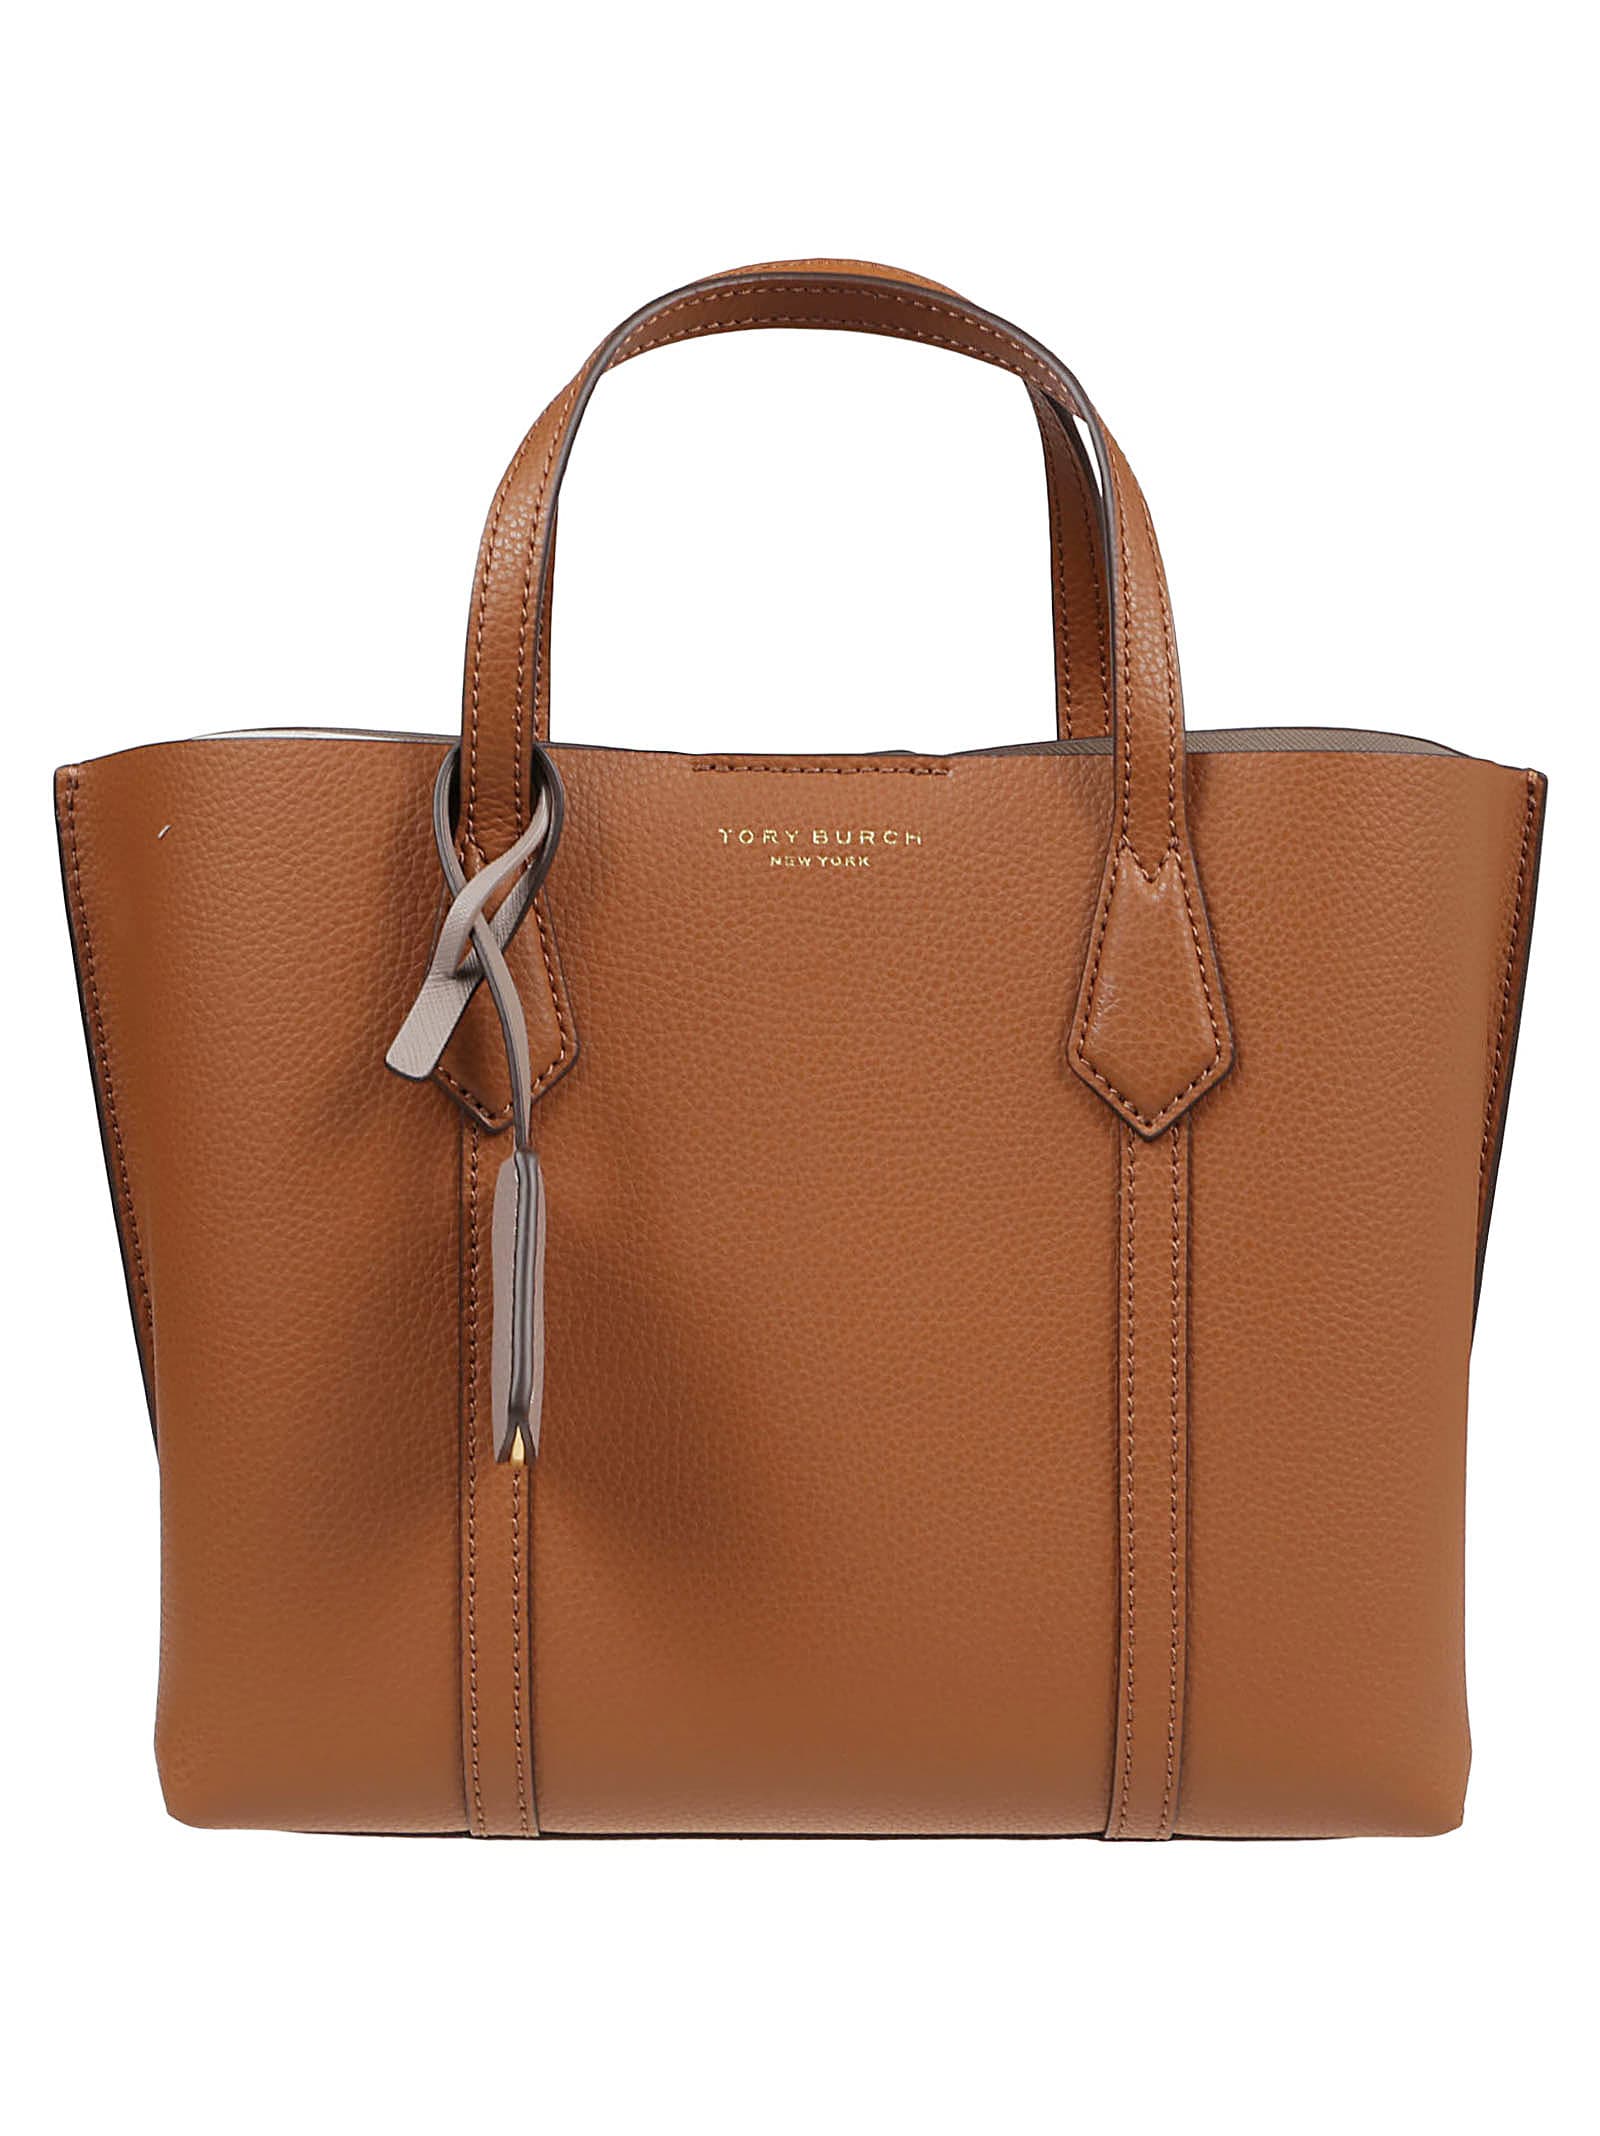 Tory Burch Small Perry Triple-compartment Tote Bag | italist, ALWAYS LIKE A  SALE